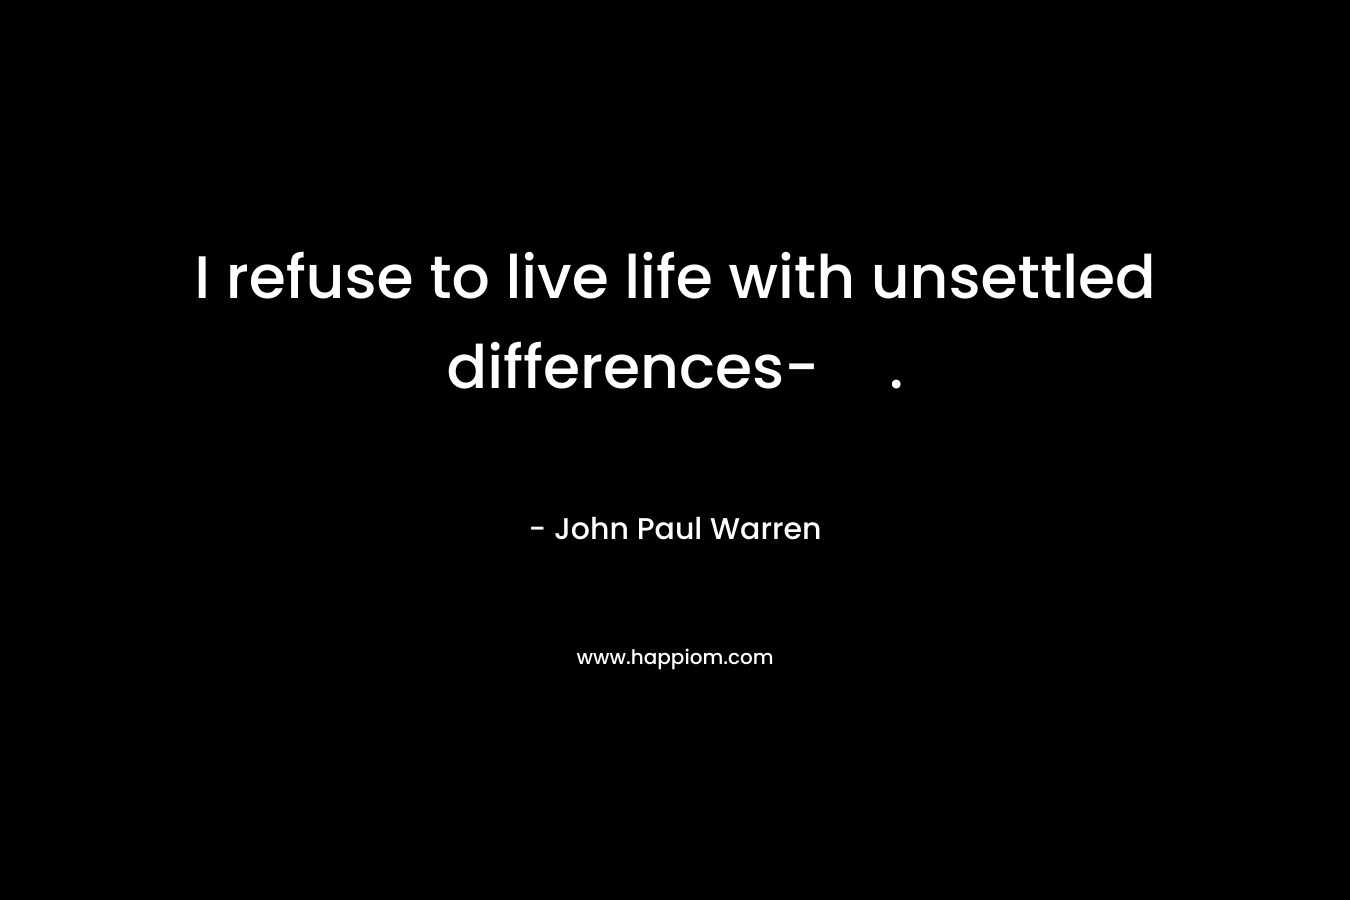 I refuse to live life with unsettled differences-.